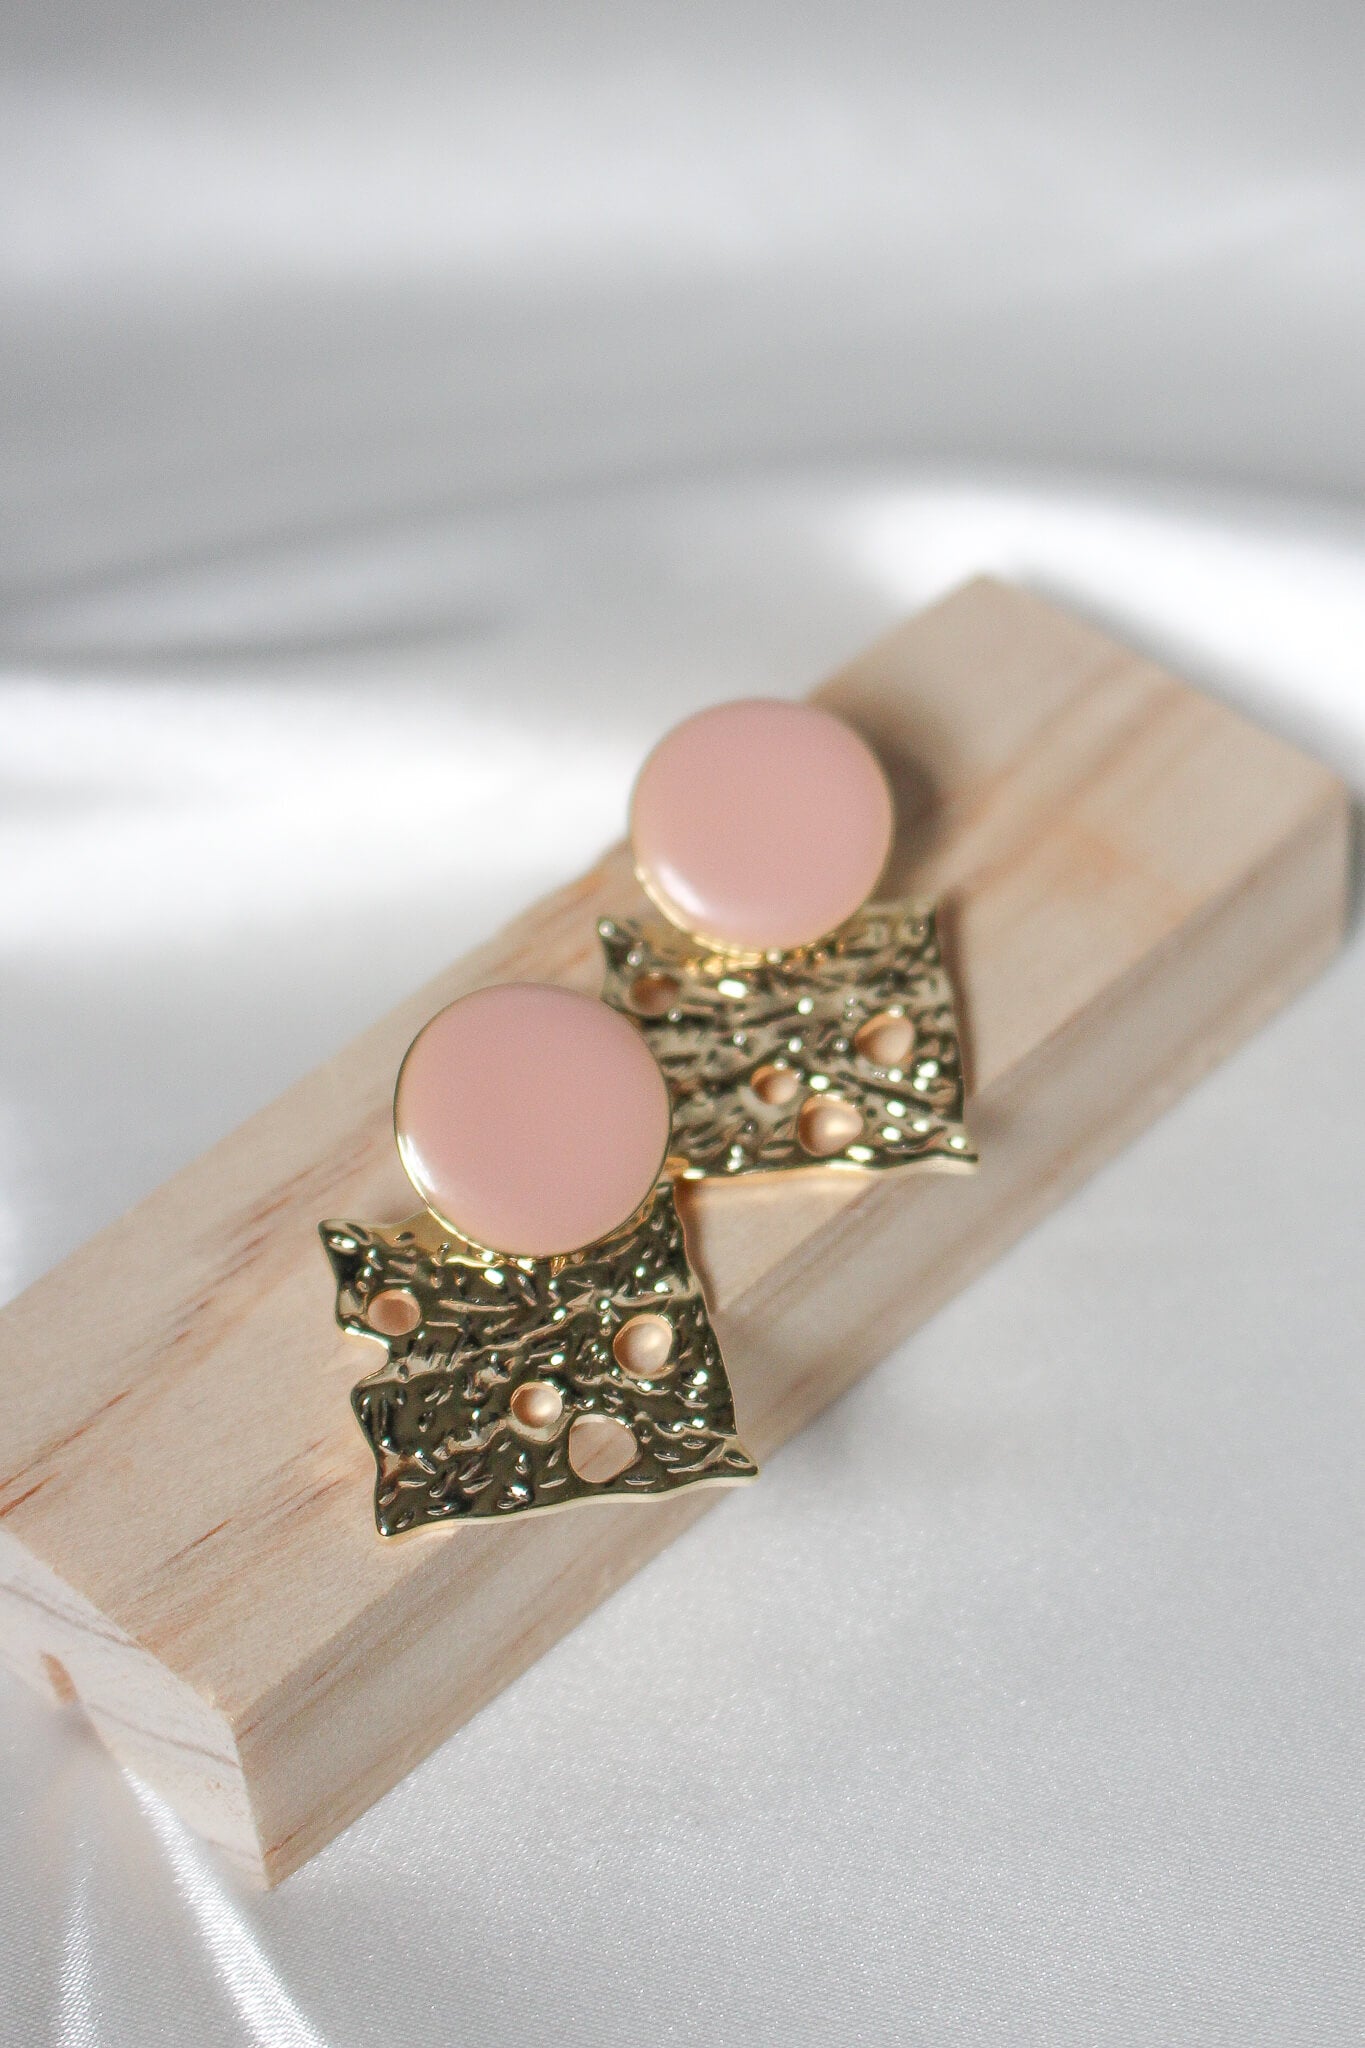 Gold and peach pink earrings, looks like cheese.